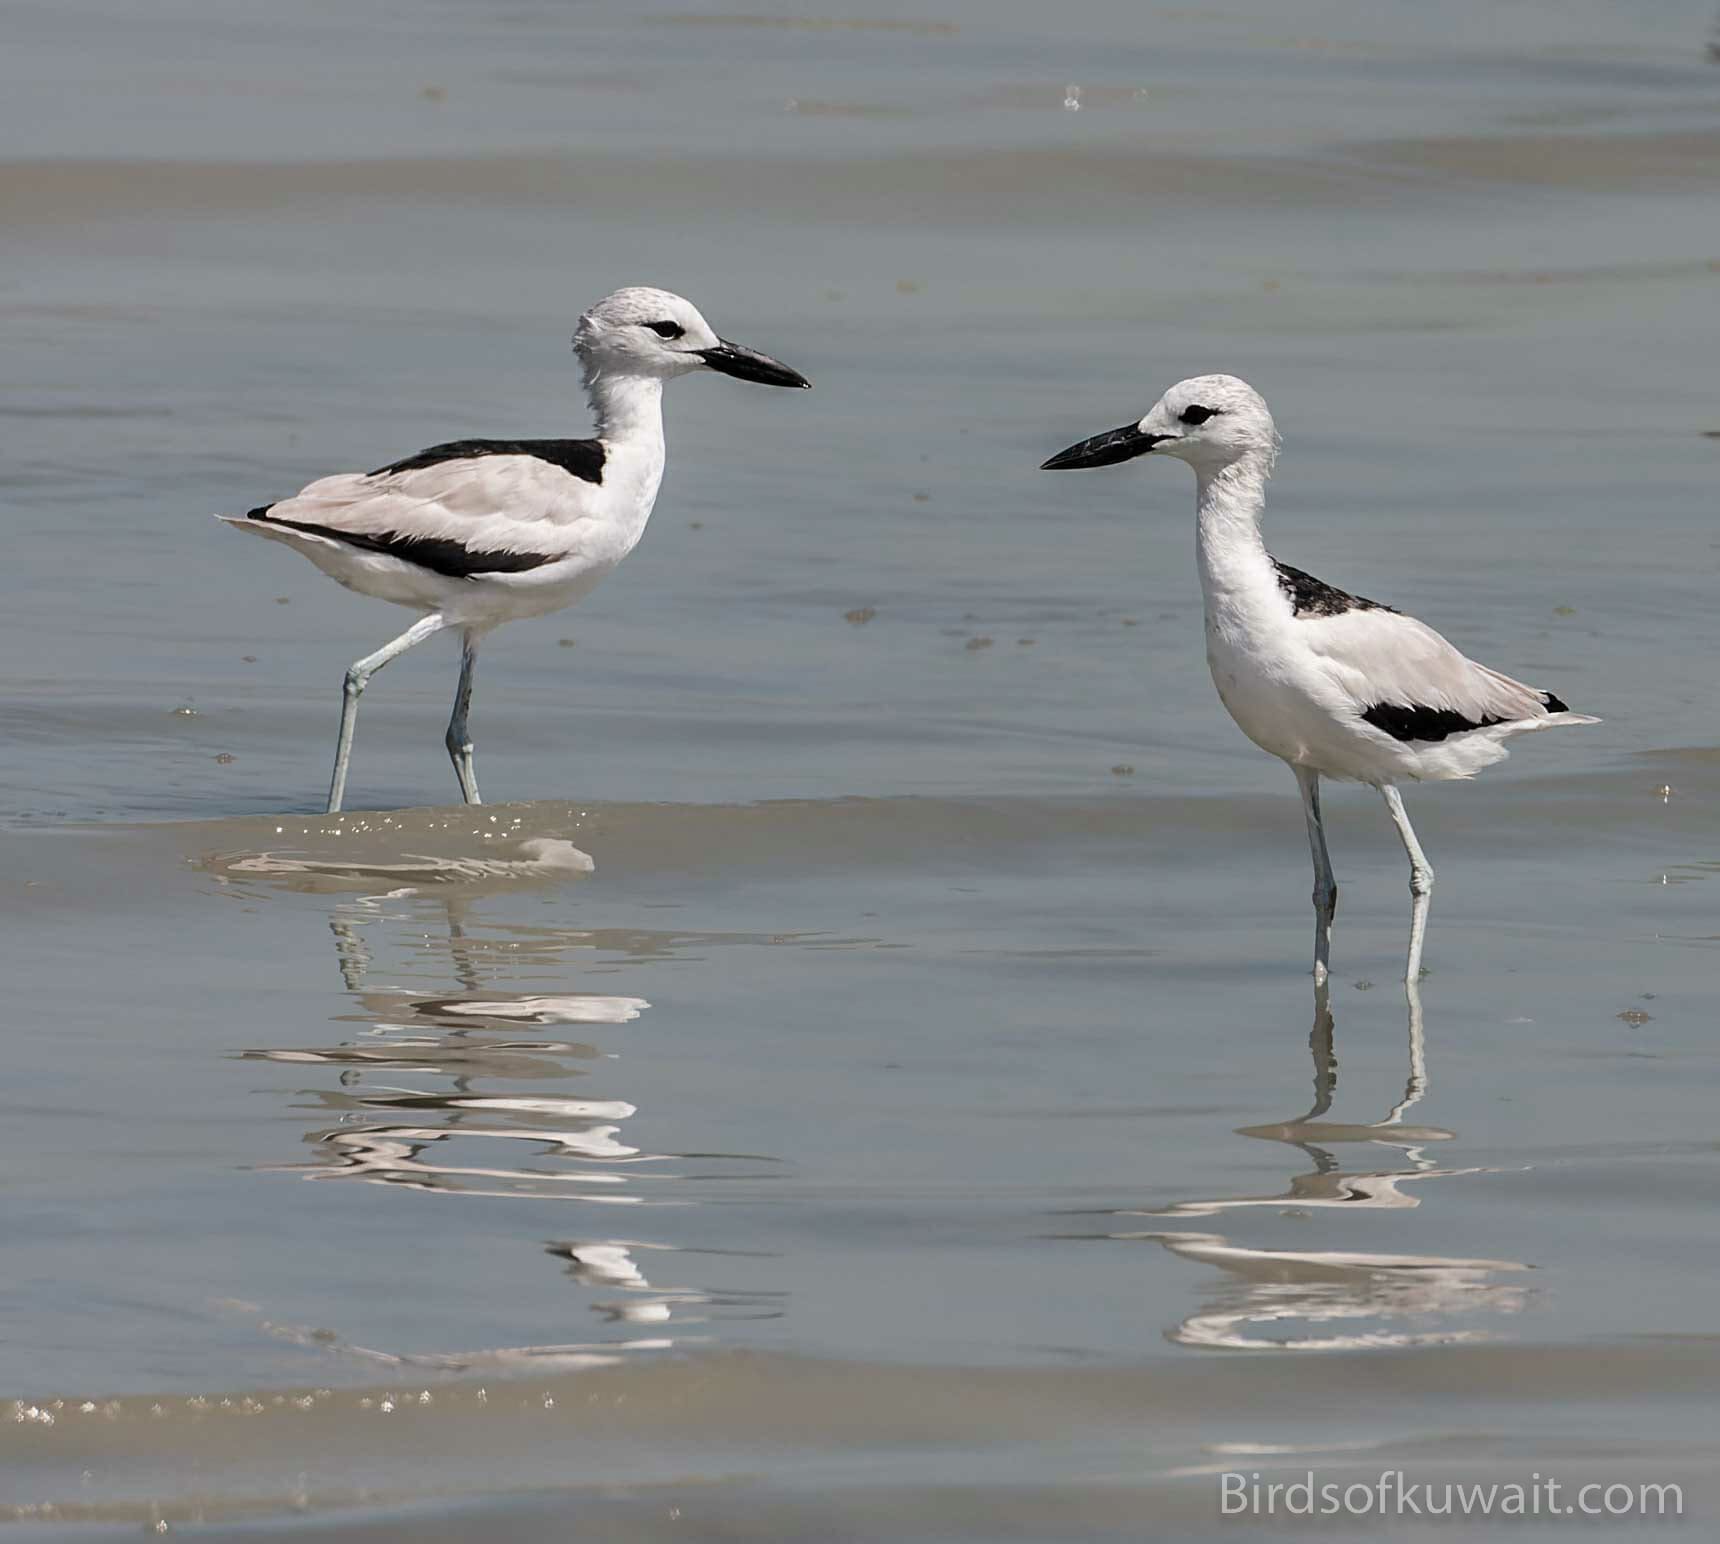 The Crab-plover is one of the target species from Kuwait Bird List